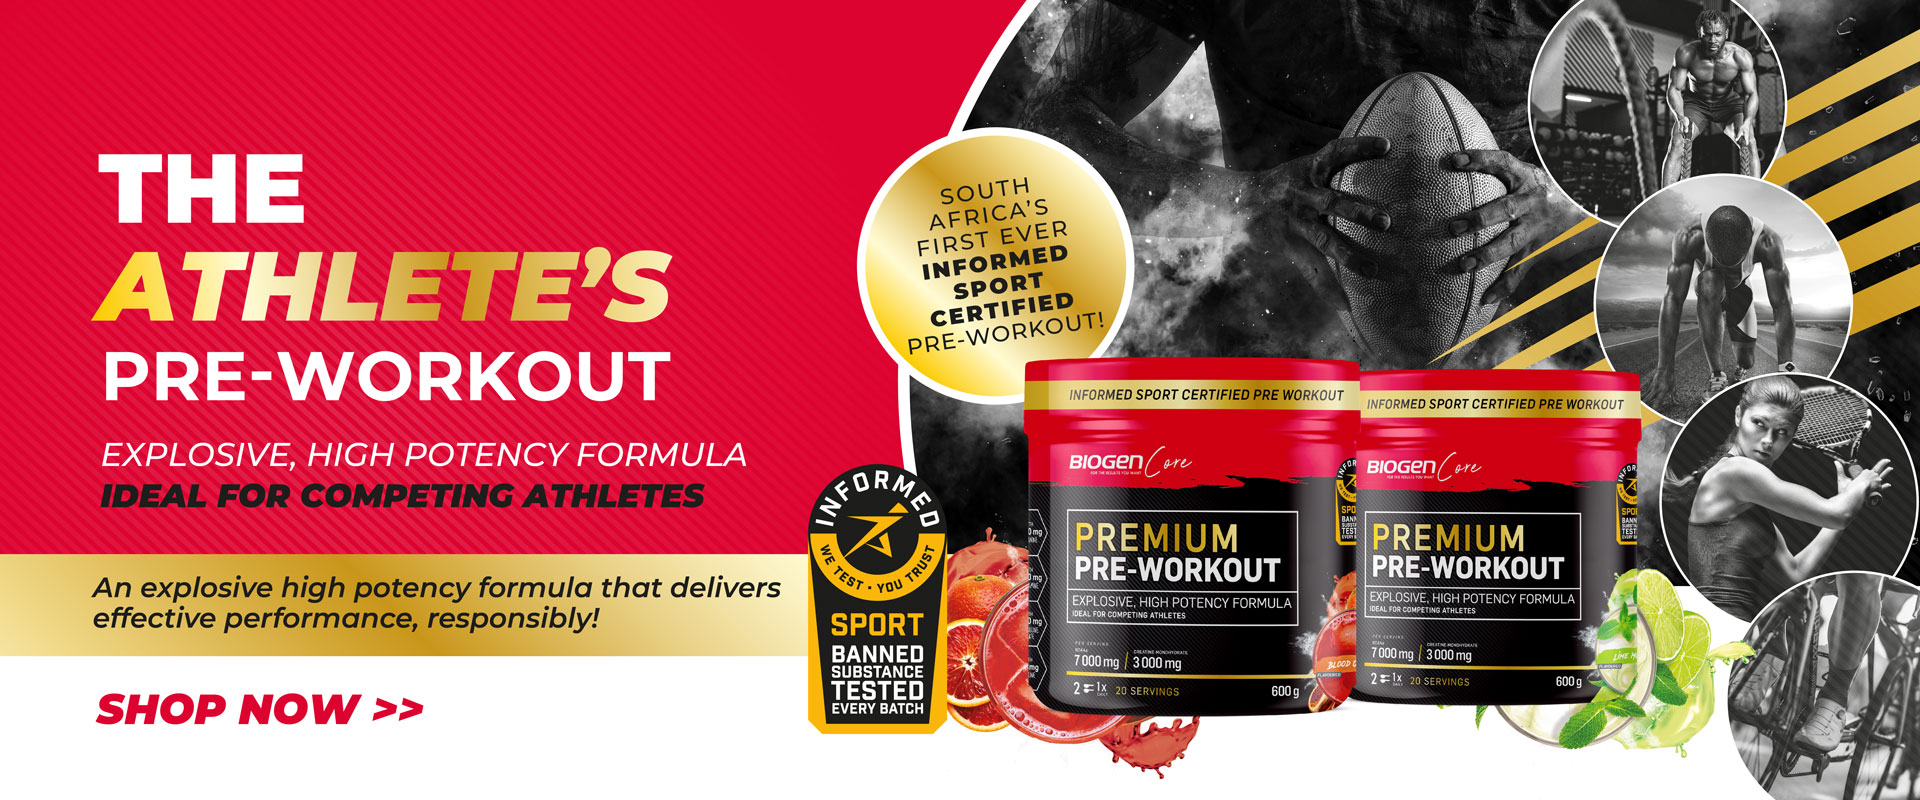 The Athletes Pre-Workout - Ideal for Competing Athletes